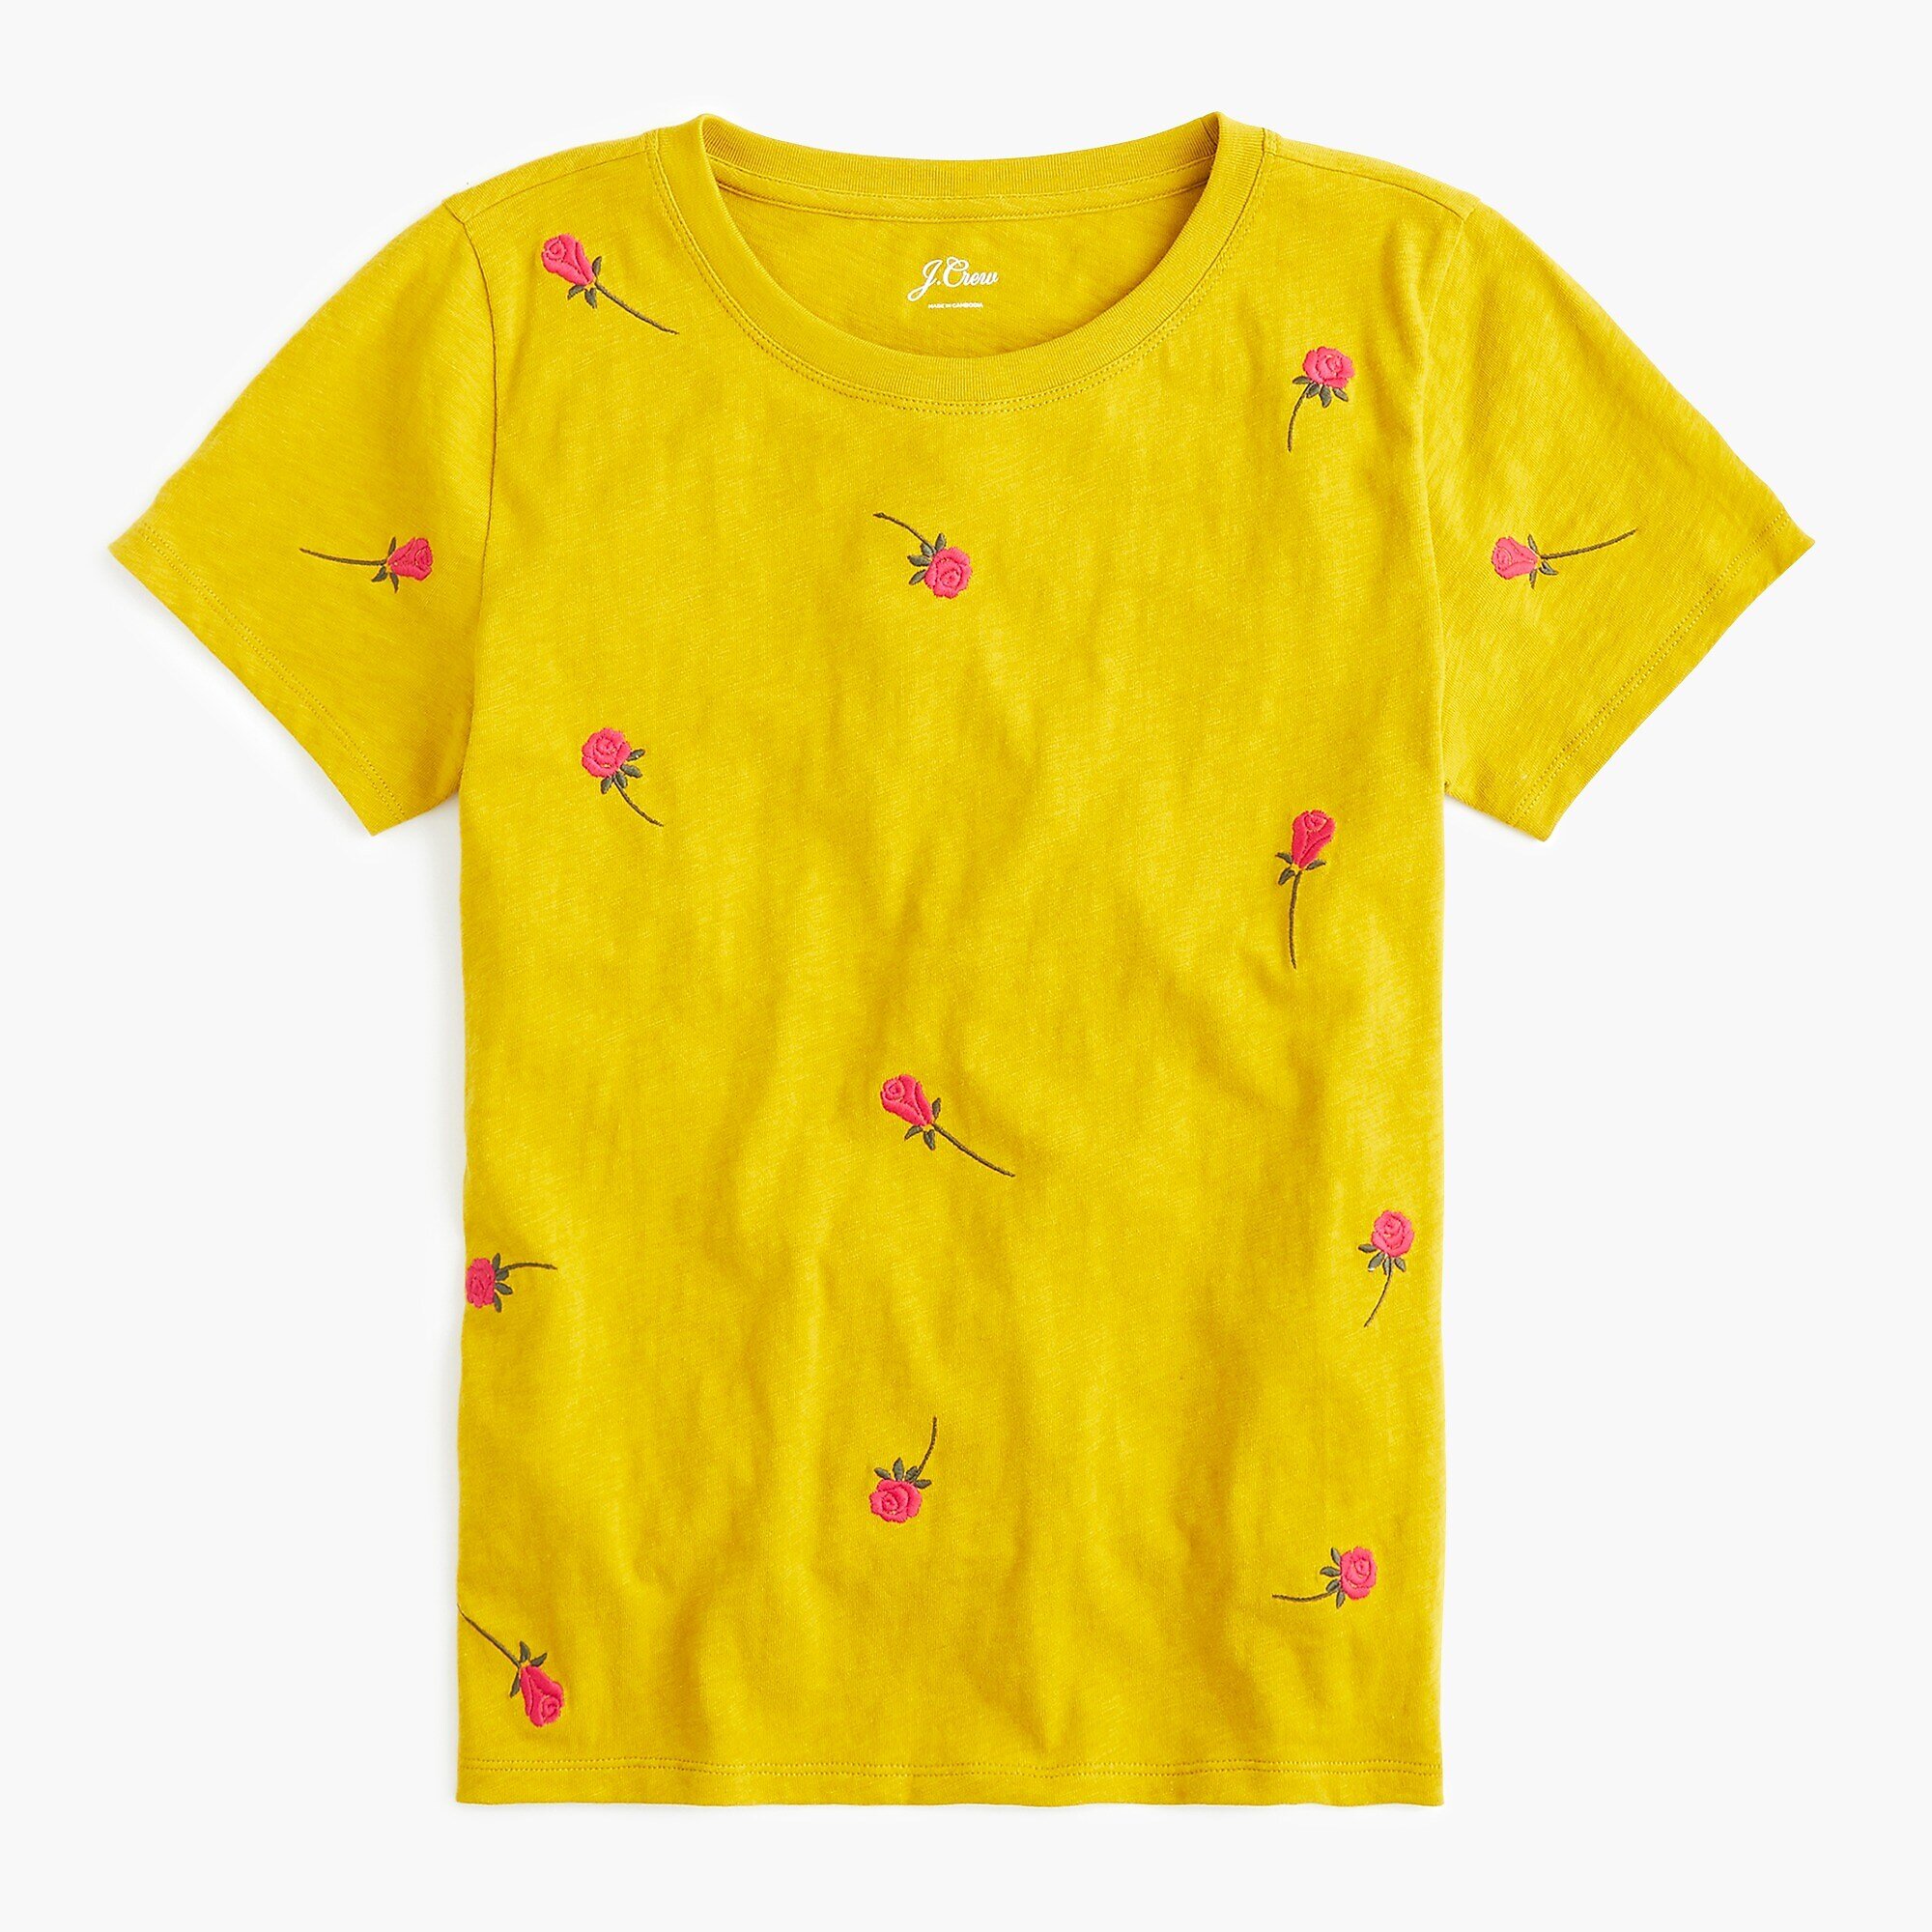 Camilla Atkins, CATKINS DESIGN for J. Crew, Summer 2019 Roses embroidered tee shirt-3.jpeg